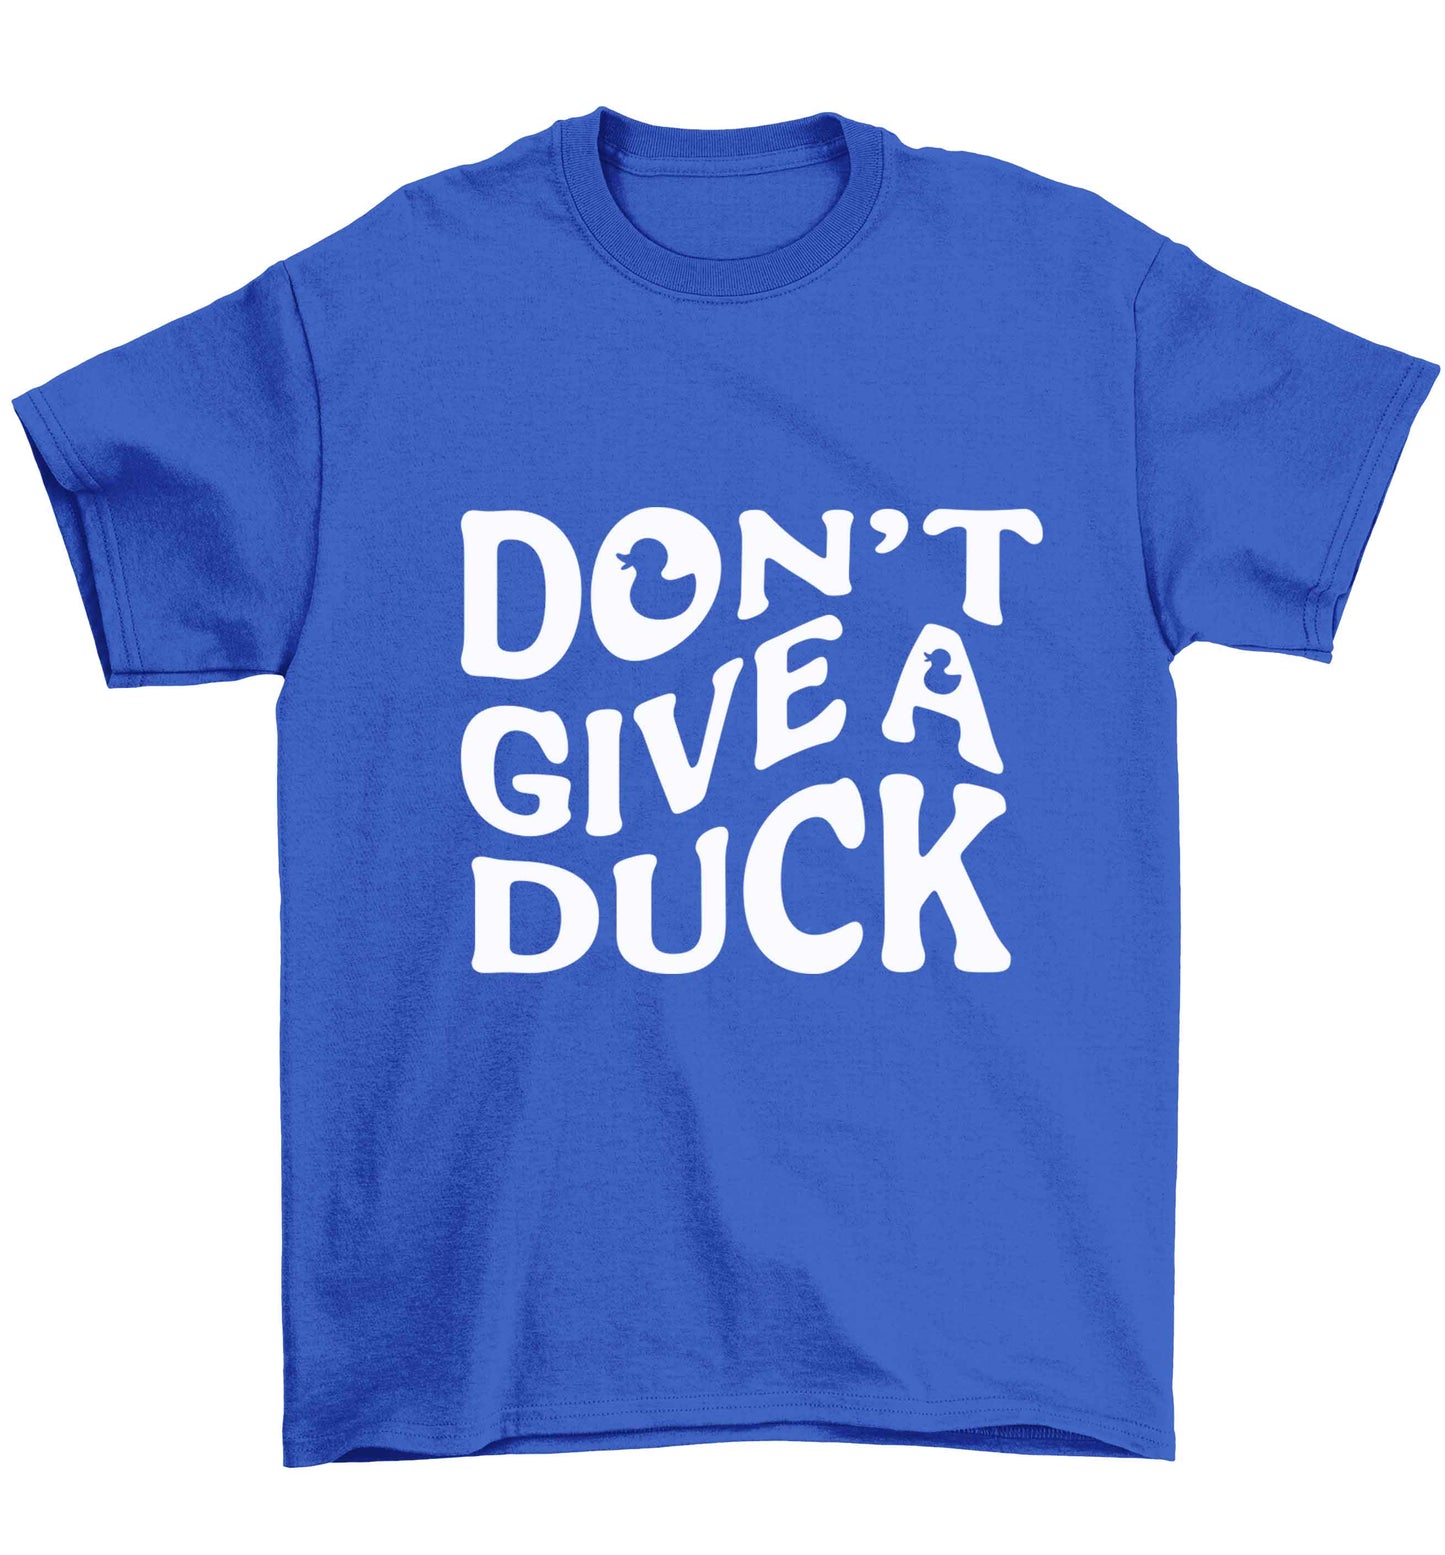 Don't give a duck Children's blue Tshirt 12-13 Years